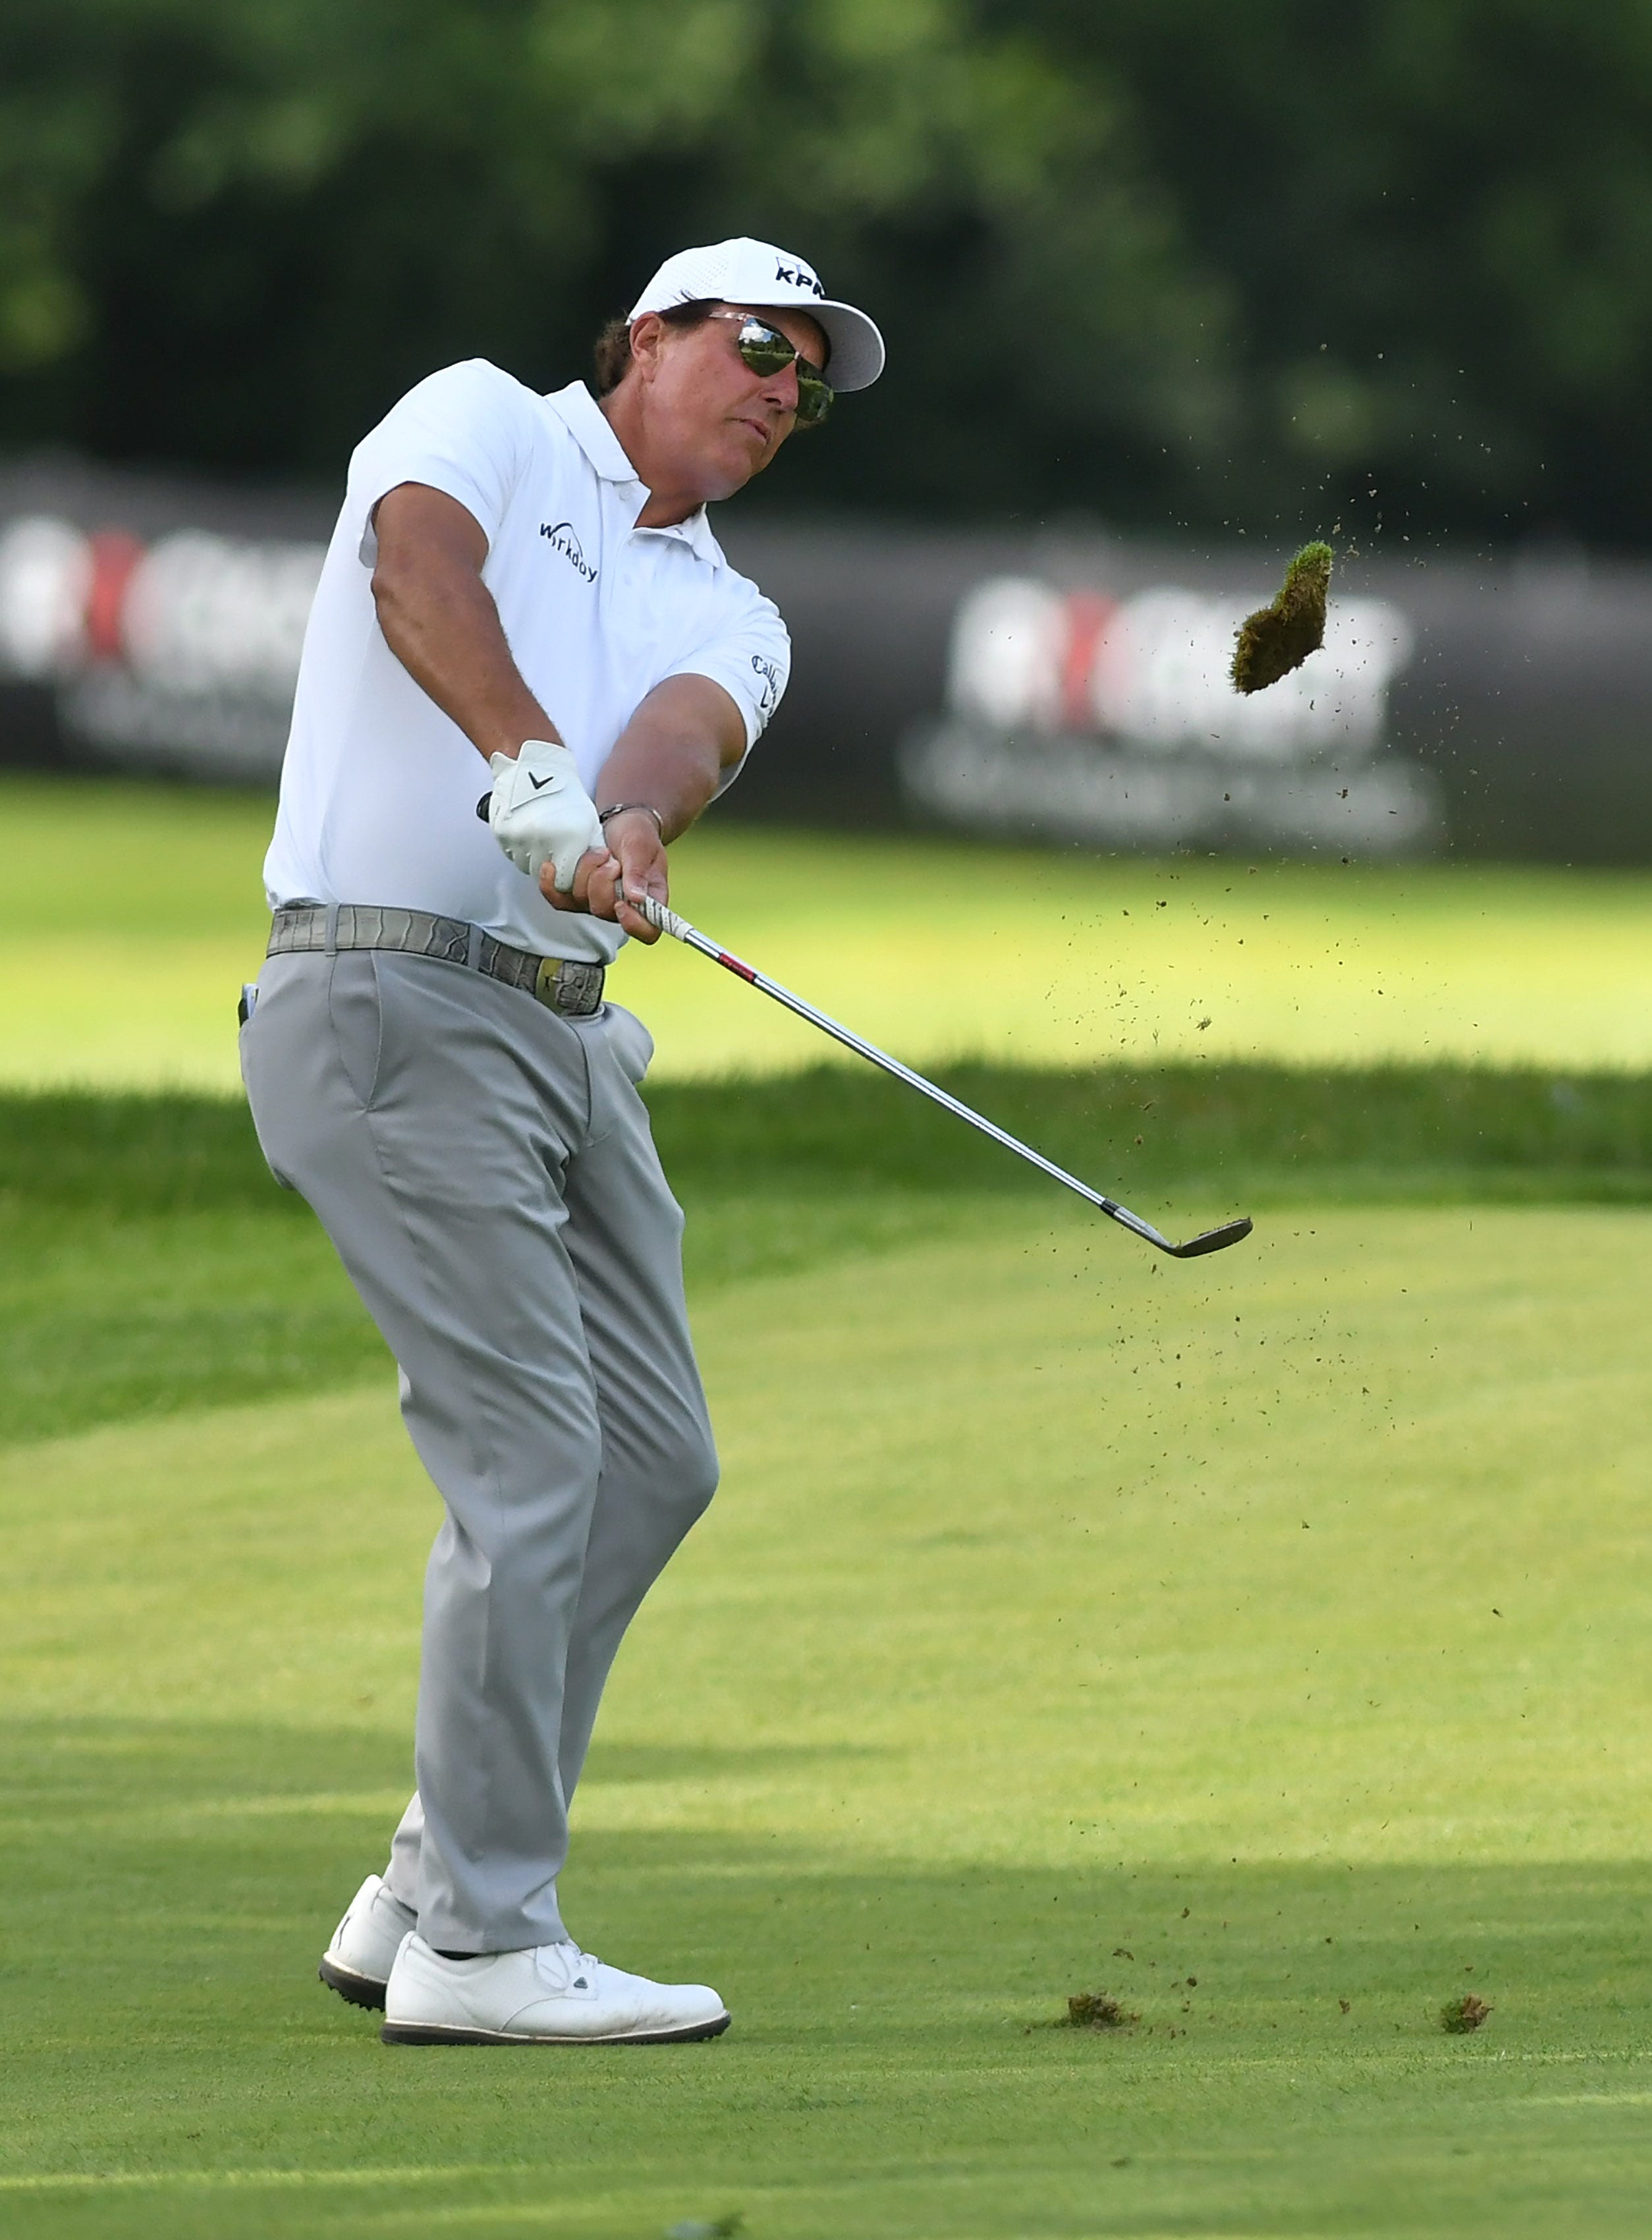 Phil Mickelson hits a fairway shot on the eighth hole.